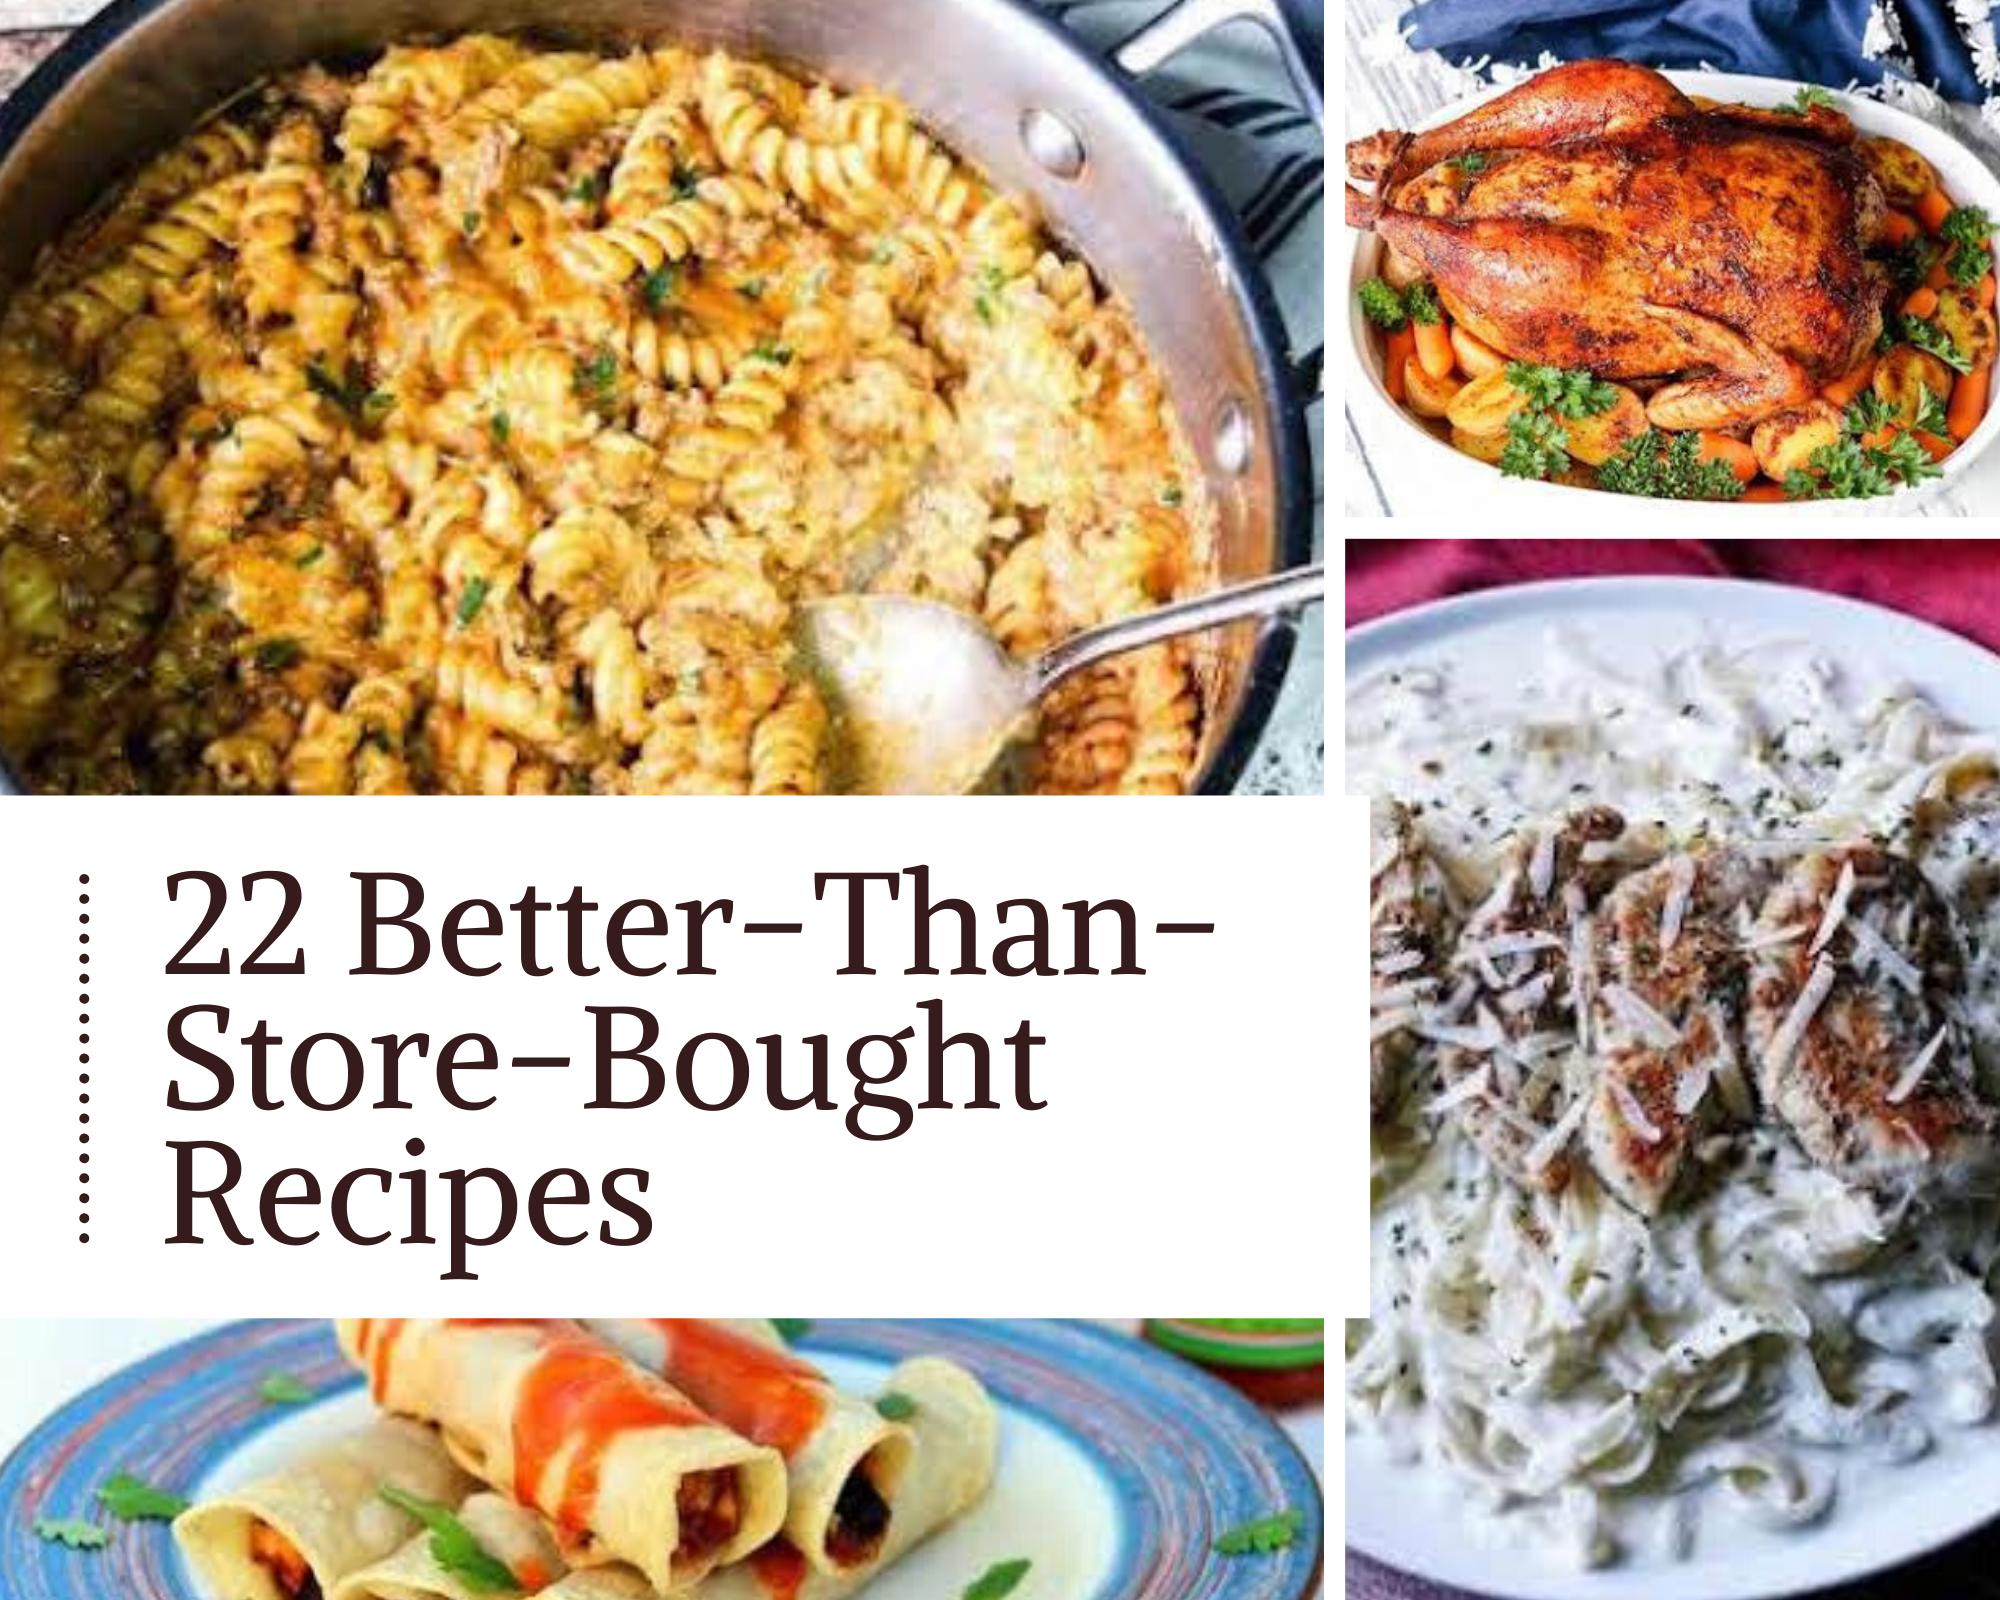 better-than-store-bought recipes